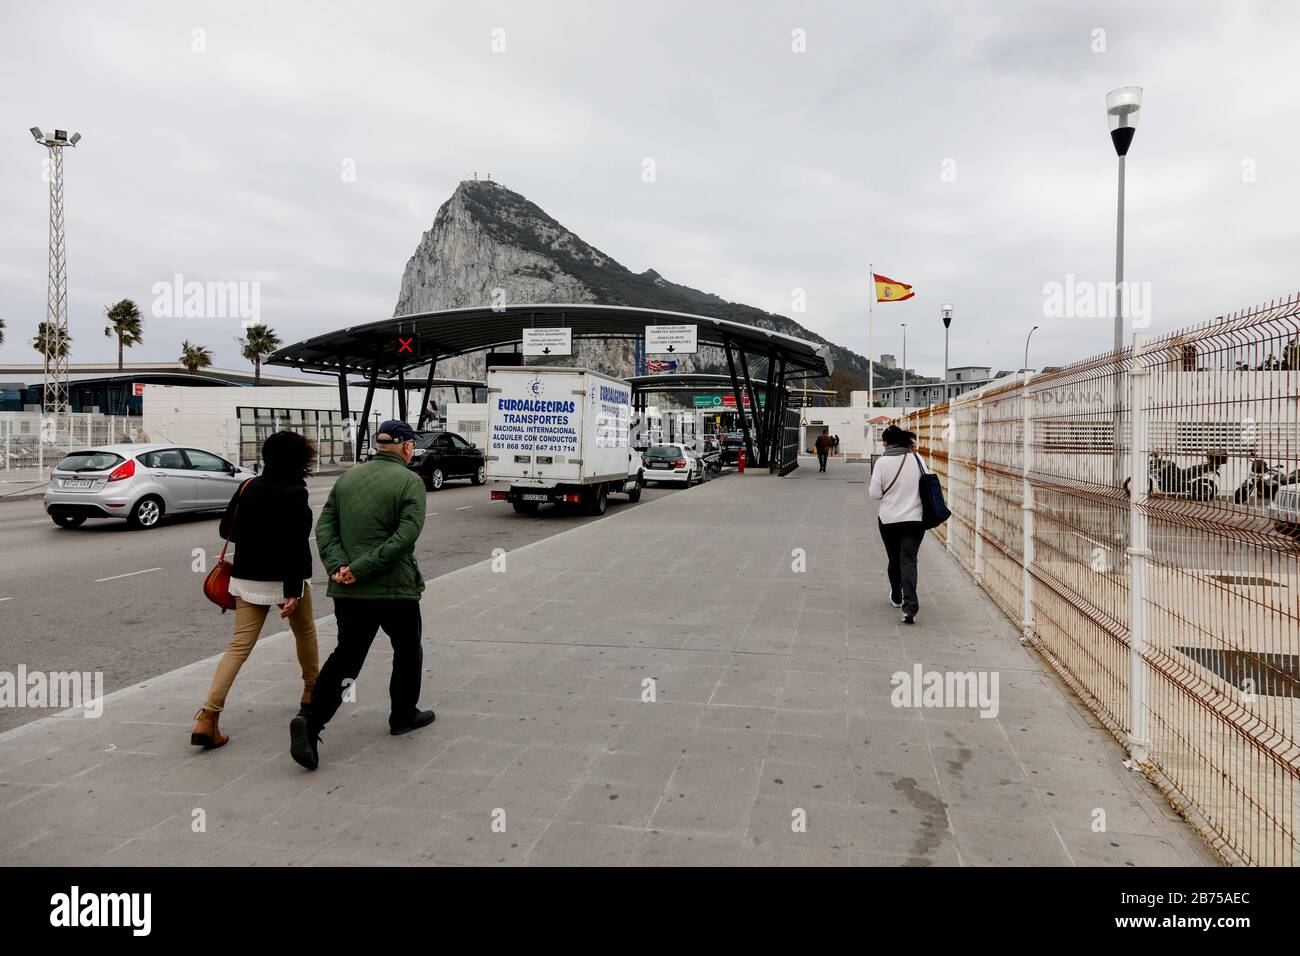 People on their way to the border crossing to Gibraltar on 14.02.2019. Thousands of Spaniards commute every day from Spain to Gibraltar to get to their workplace. Gibraltar is waiting to see how Britain's future withdrawal from the European Union might affect Gibraltar. In the 2016 brexite vote, 96 percent of Gibraltarians voted in favour of the UK remaining in the EU. [automated translation] Stock Photo